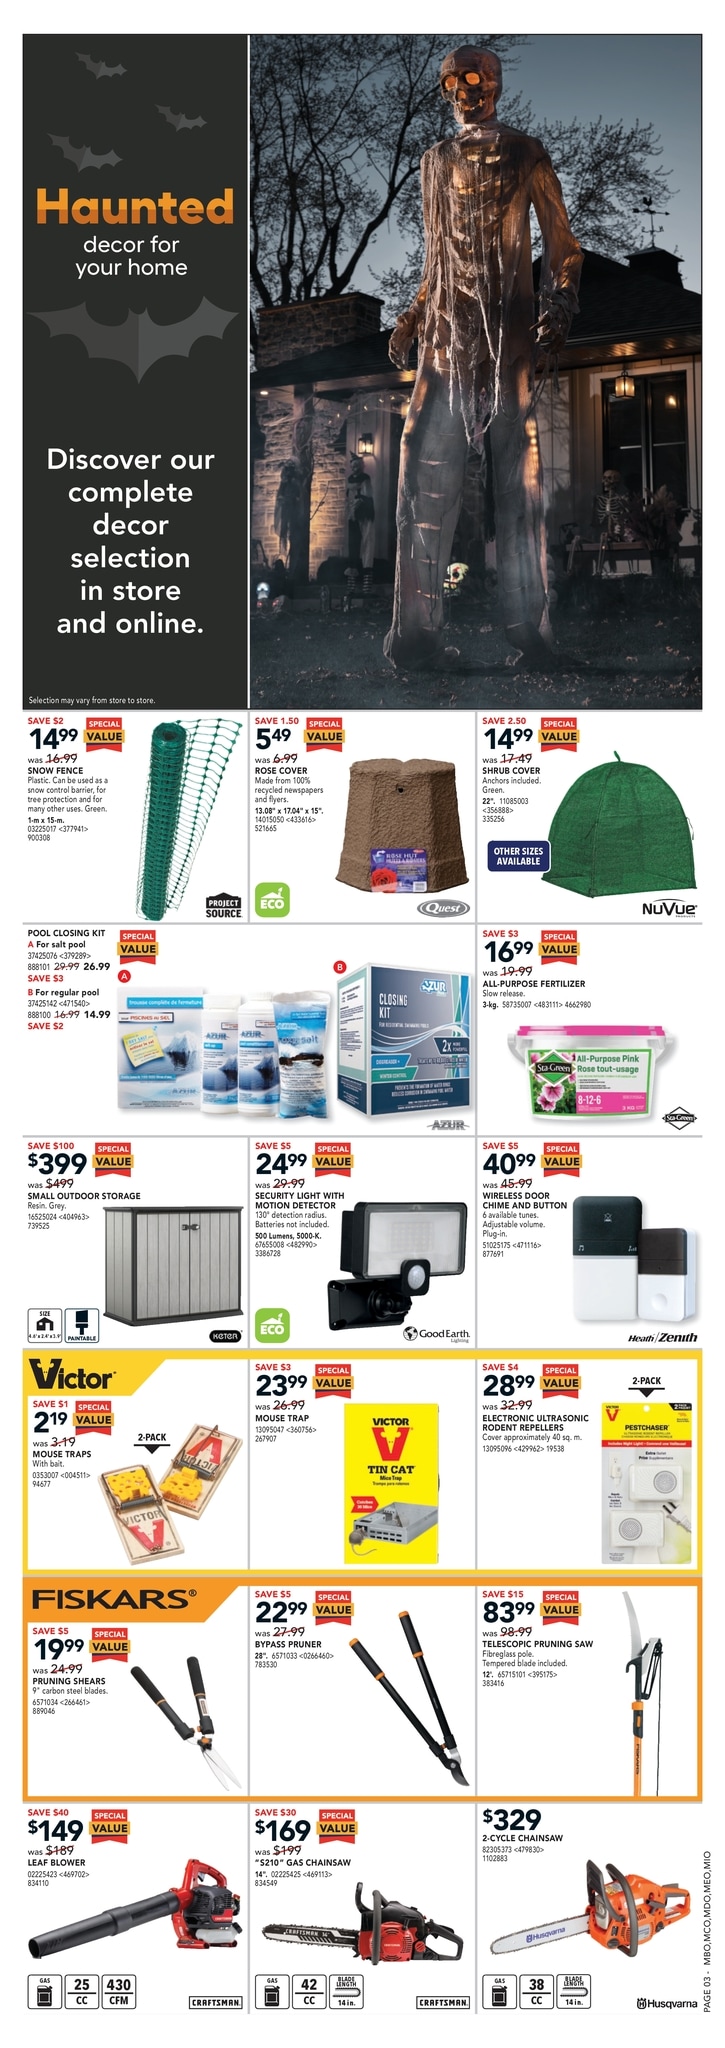 Lowe's - Weekly Flyer Specials - Page 4